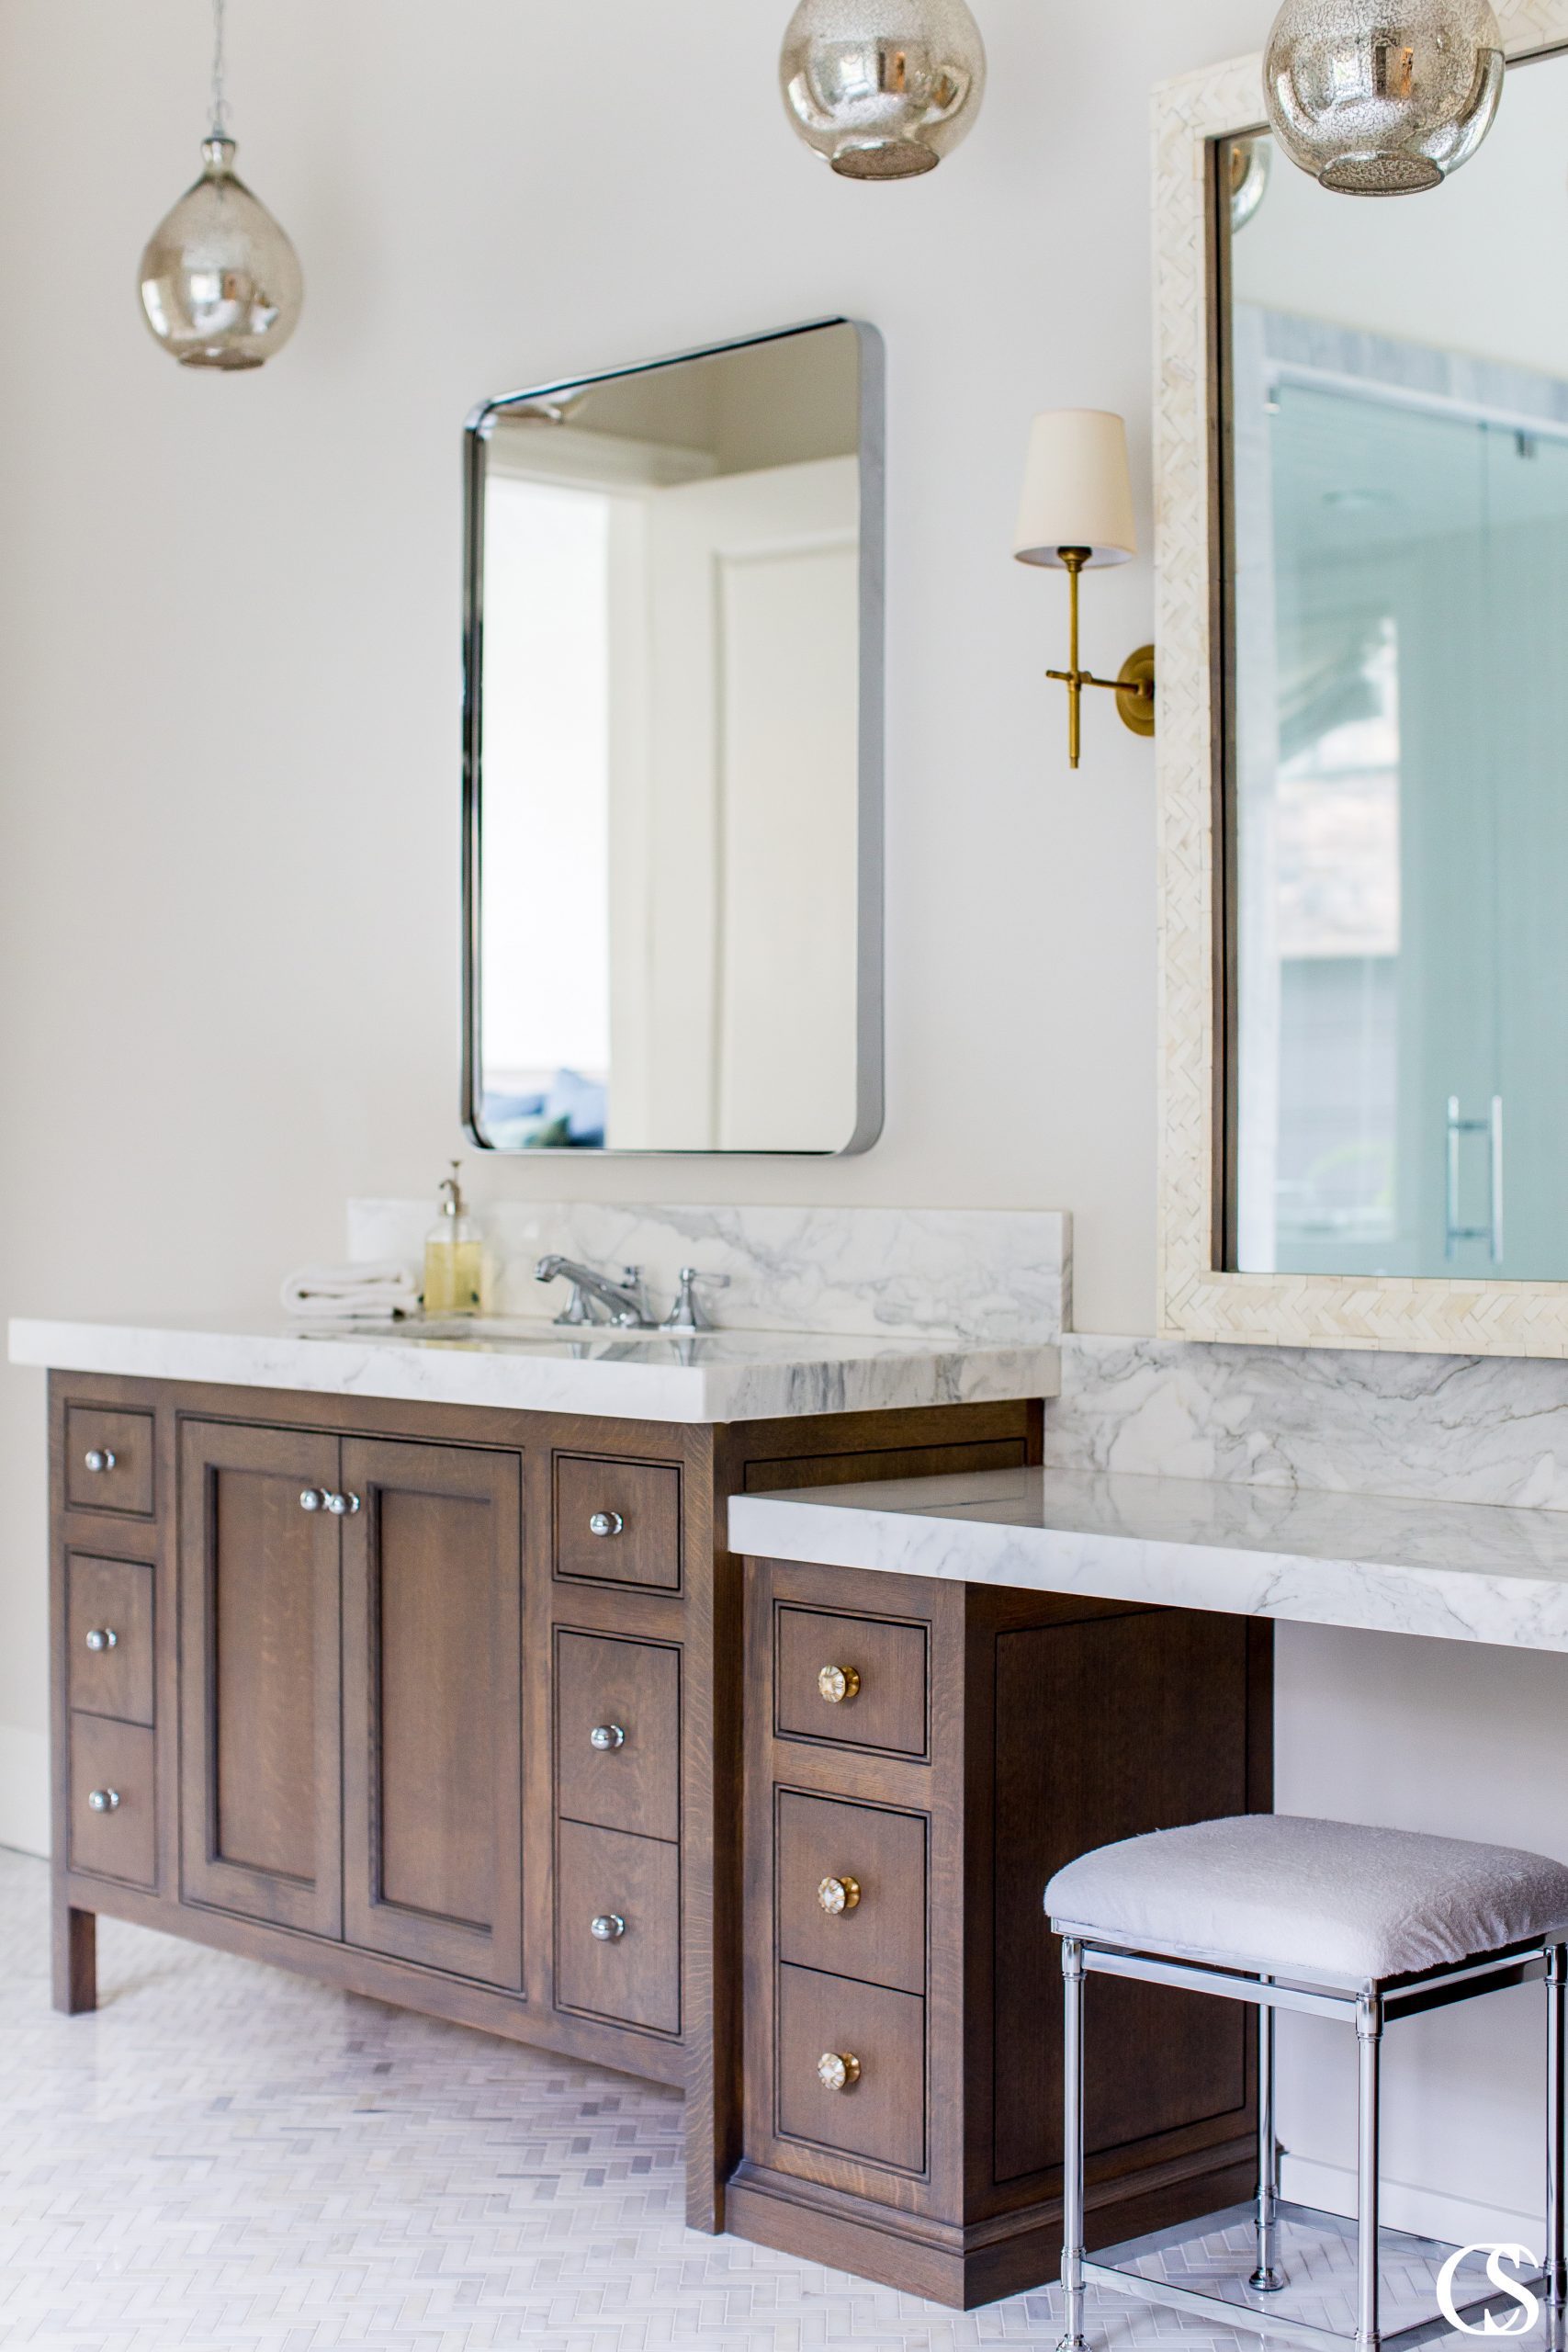 Breaking up a two sink bathroom cabinet design with a shorter vanity in the middle adds a ton of visual interest to your bathroom.